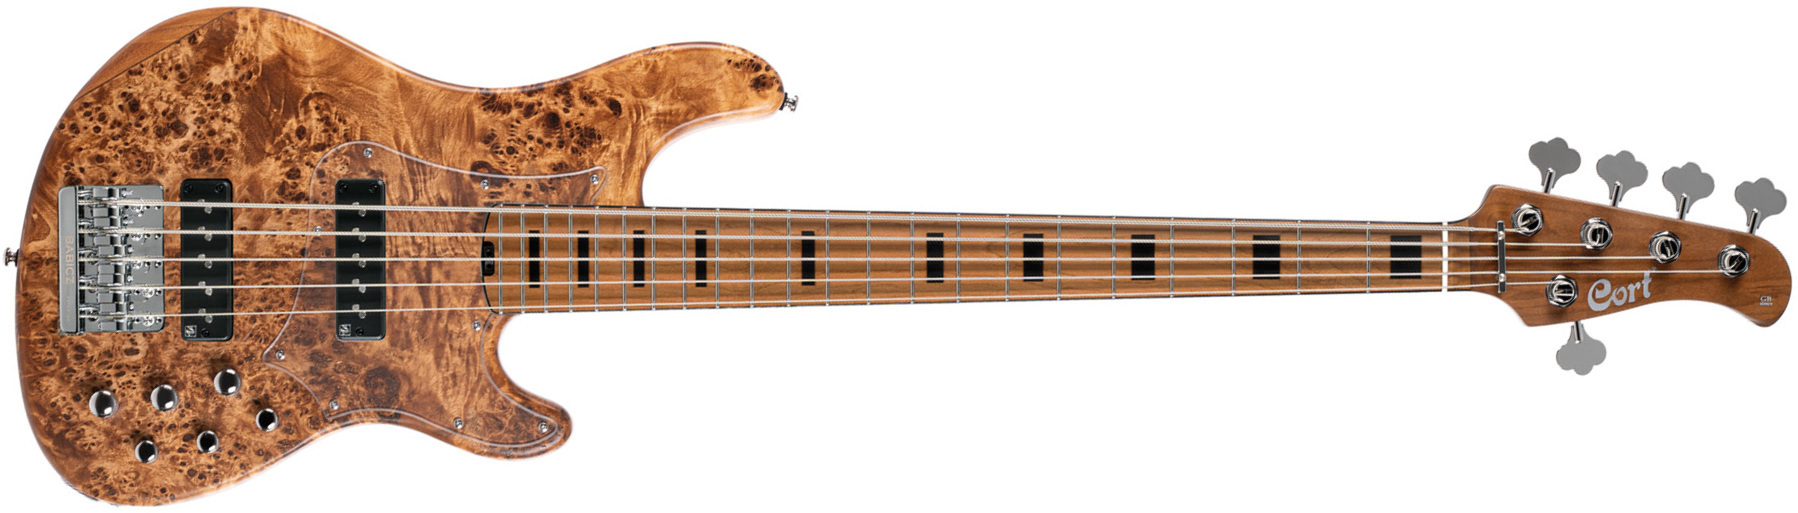 Cort Gb-modern 5c Active Mn - Open Pore Vintage Natural - Solid body electric bass - Main picture